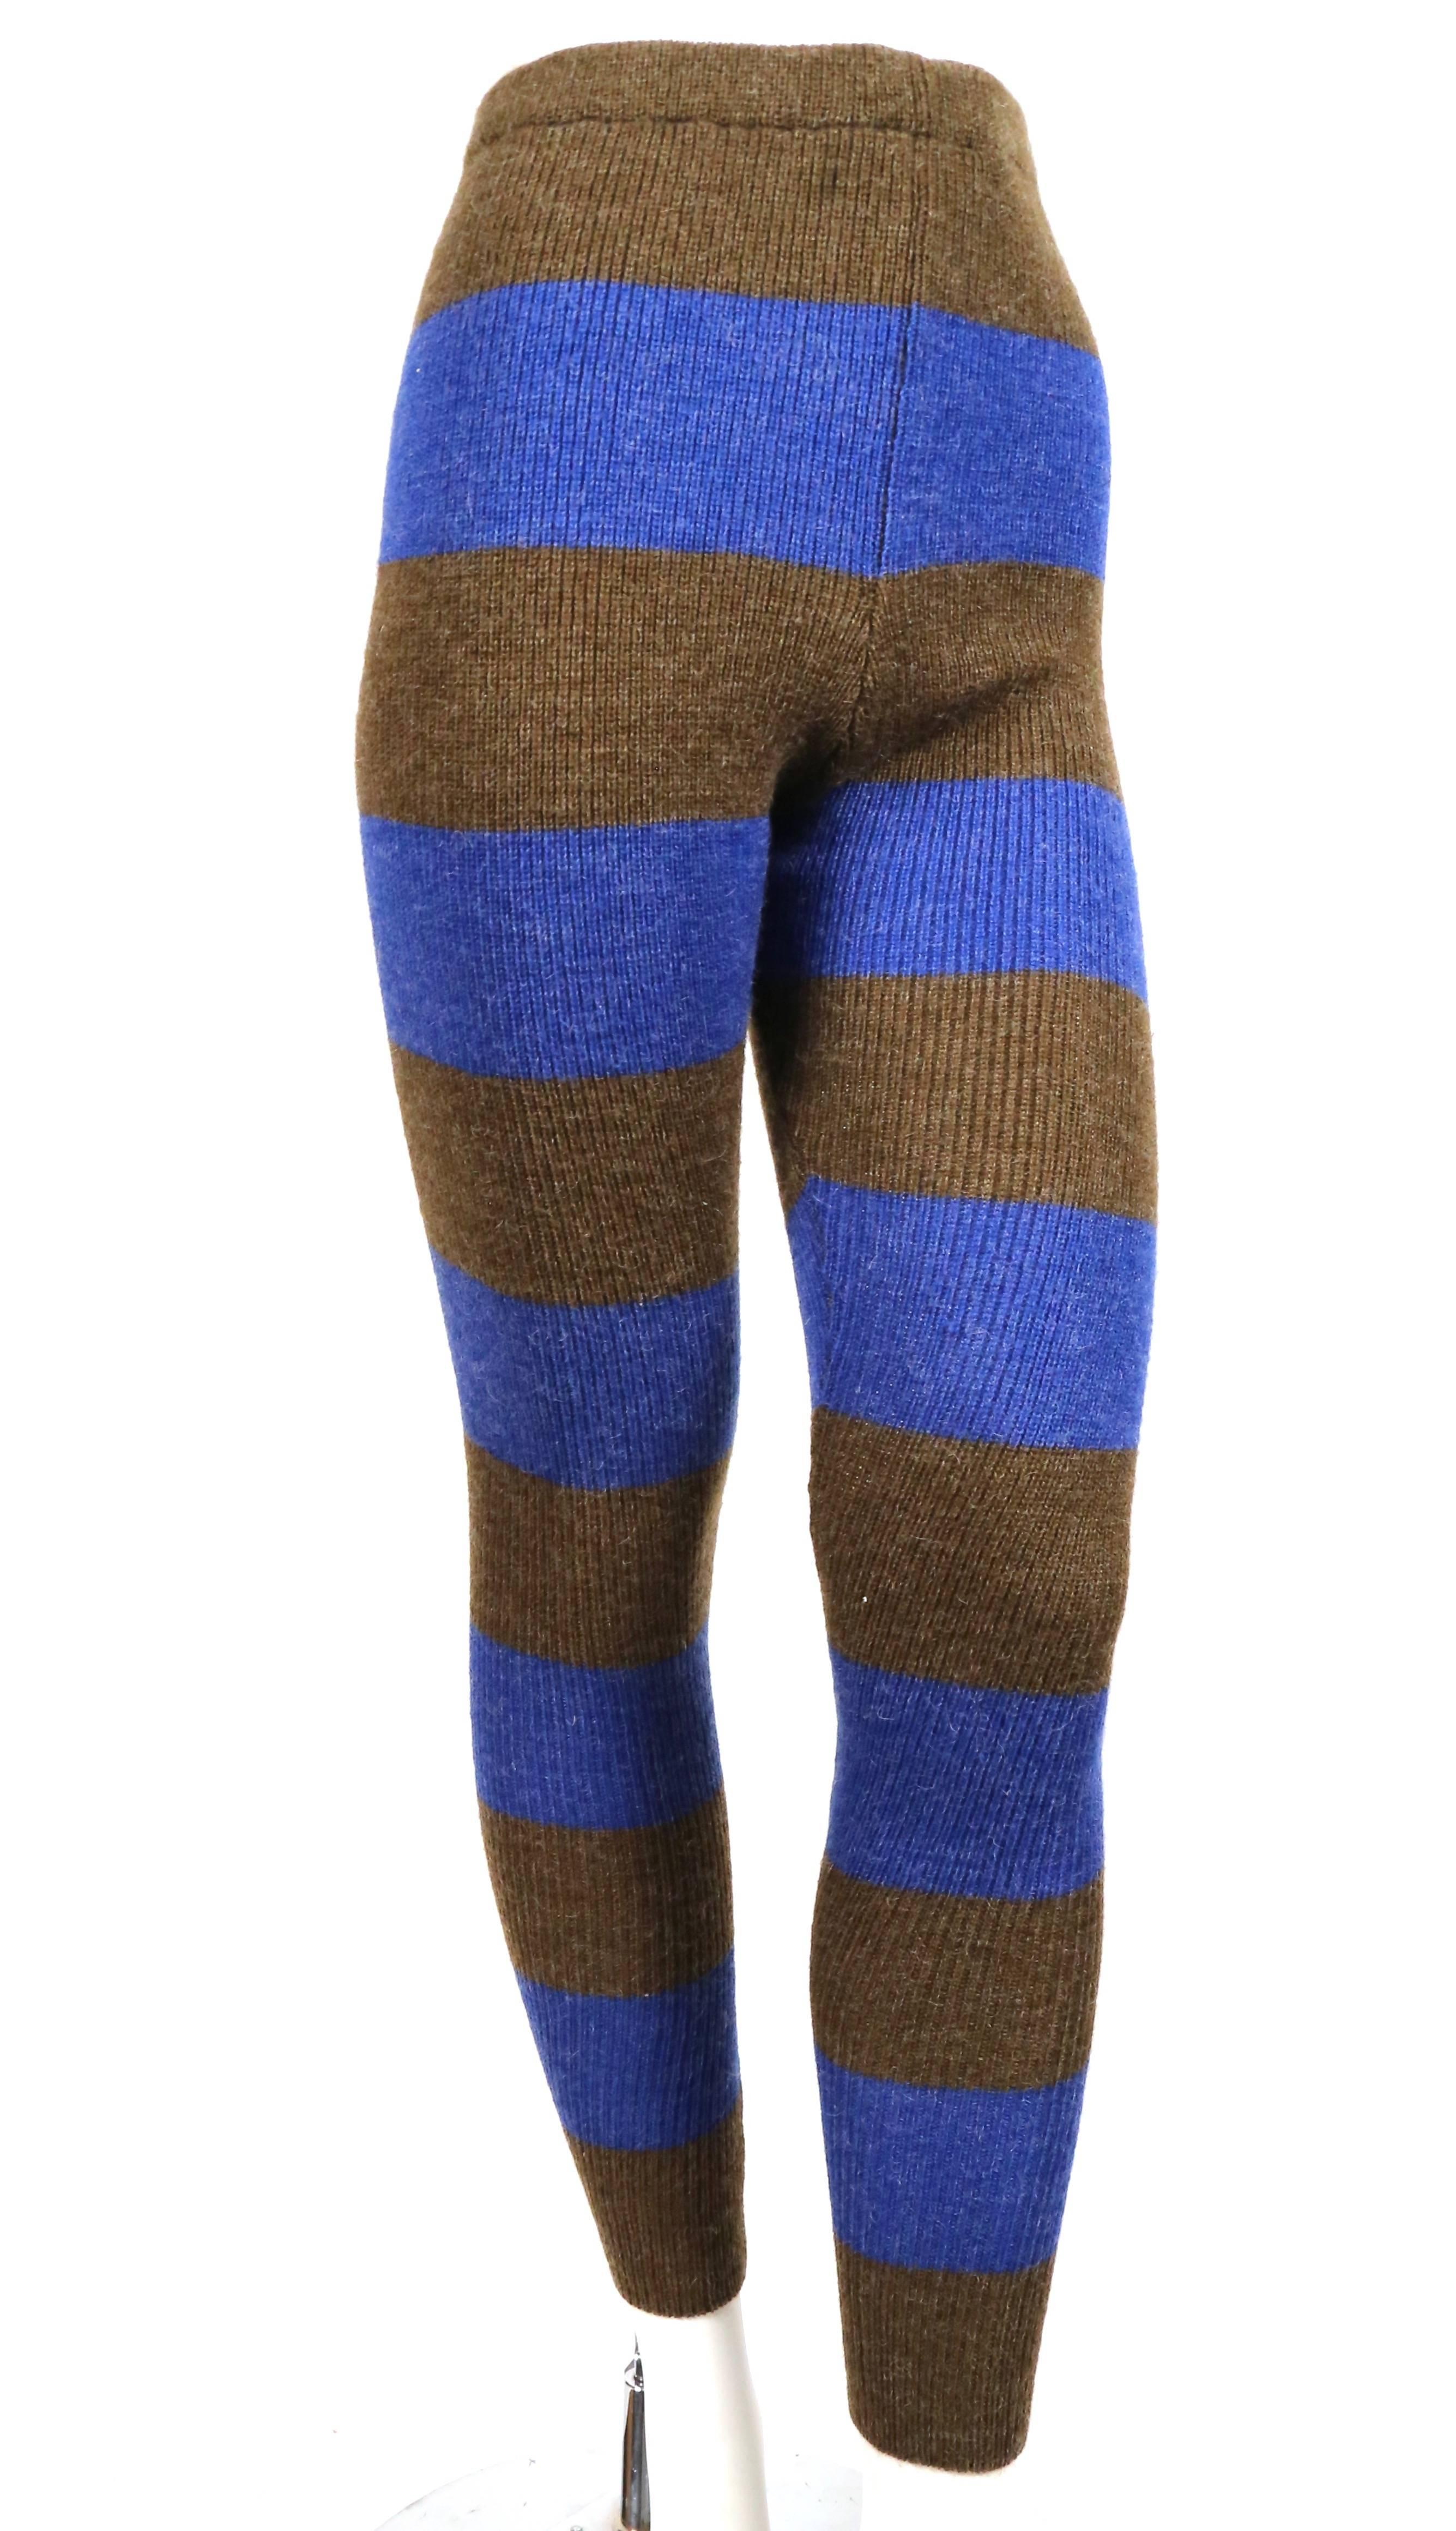 Very rare heathered brown and cobalt blue striped  knit leggings from Issey Miyake dating to the late 1970's. Labeled a size S/M. Approximate measurements (unstretched): waist 24", rise 13.75", hips 30", inseam 31" and overall